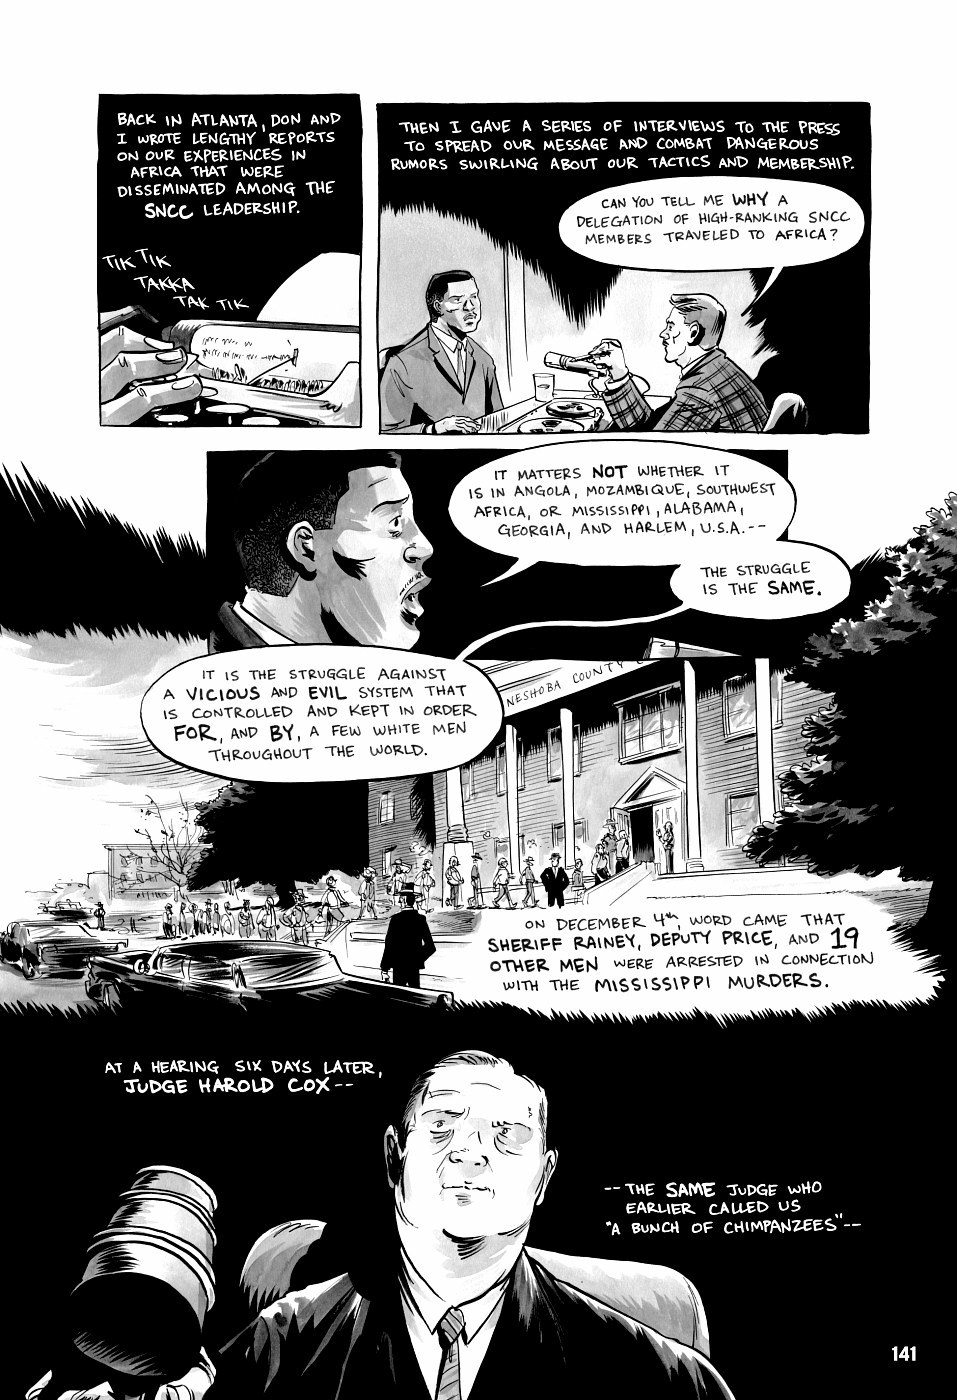 page 141 of march book three graphic novel